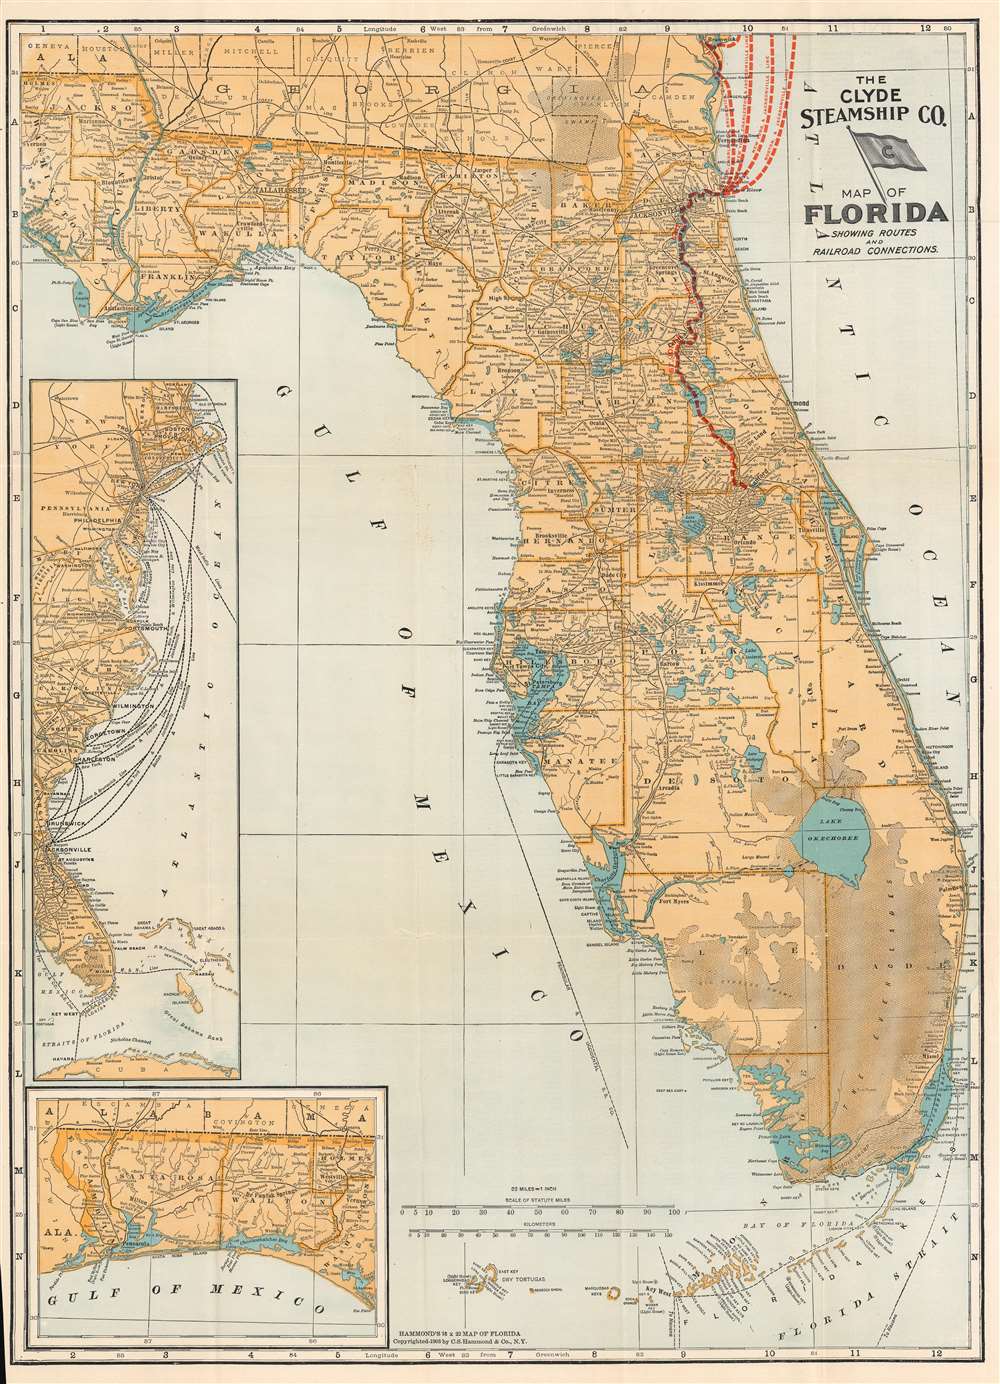 The Clyde Steamship Co. Map of Florida Showing Routes and Railroad Connections. - Main View